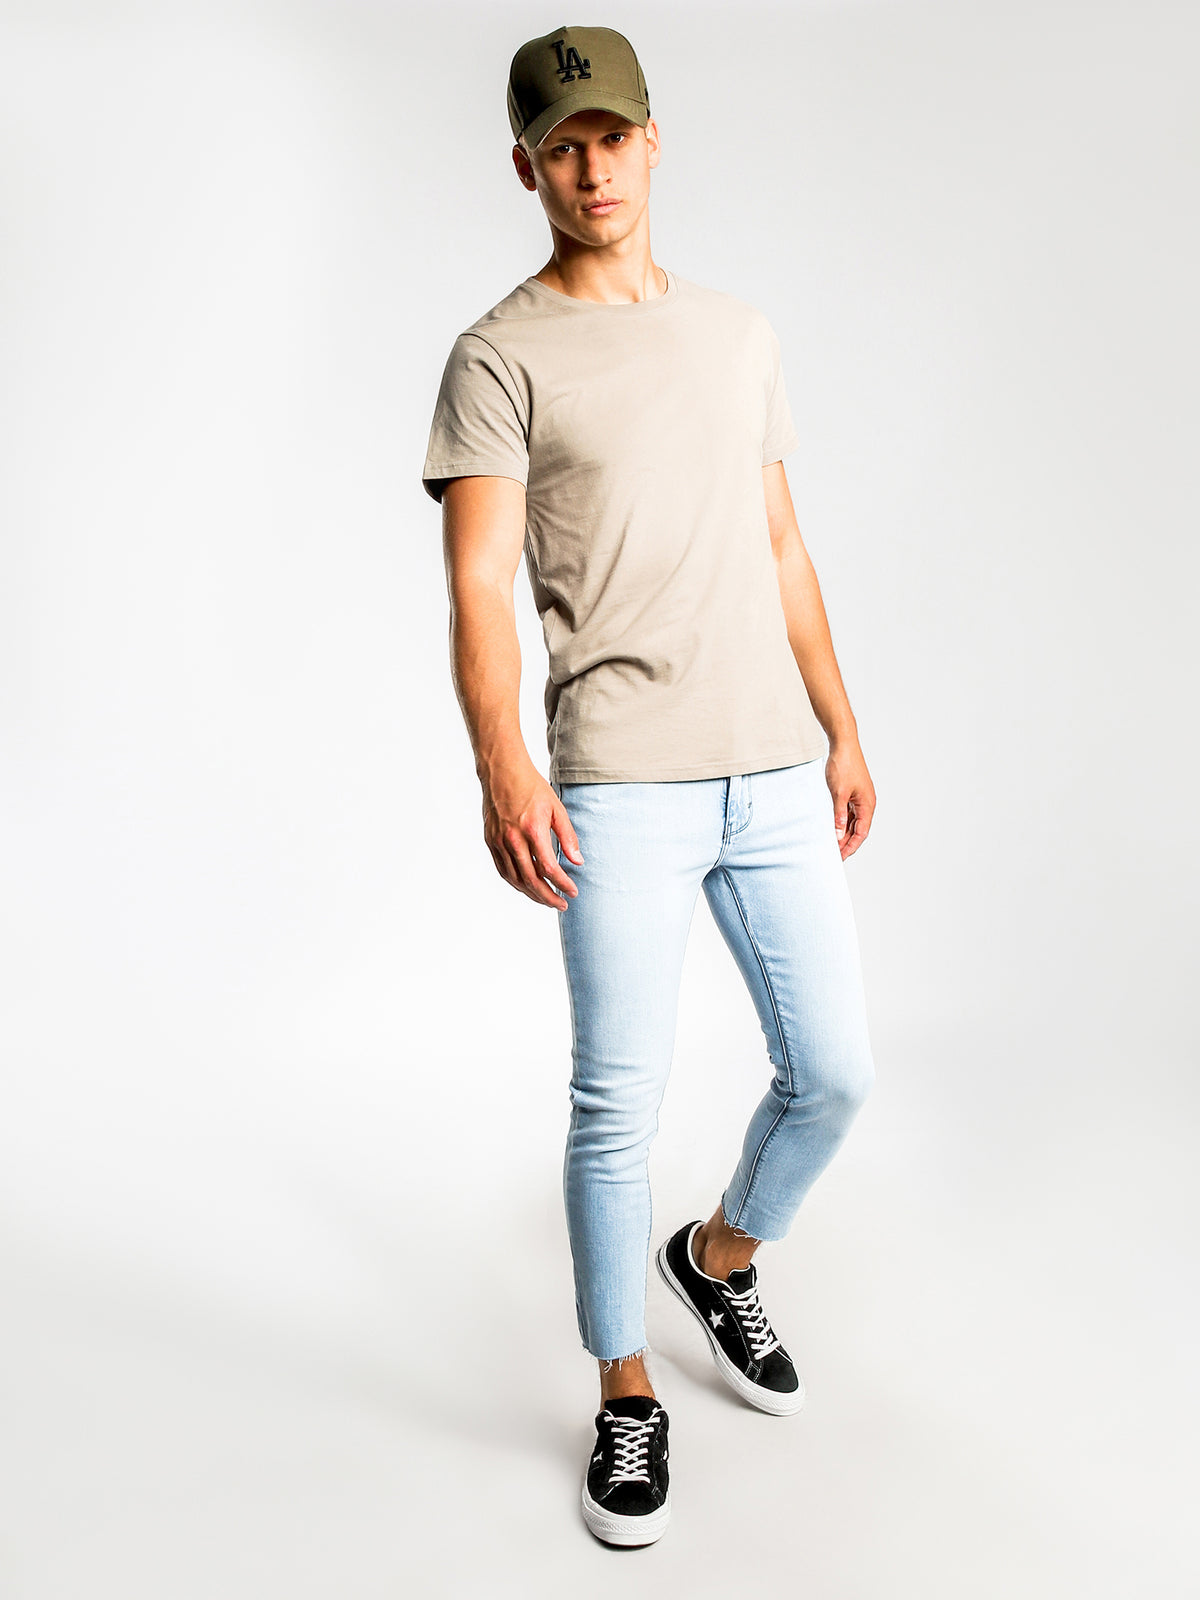 A Dropped Skinny Turn Up Jeans in Chill Blue Denim